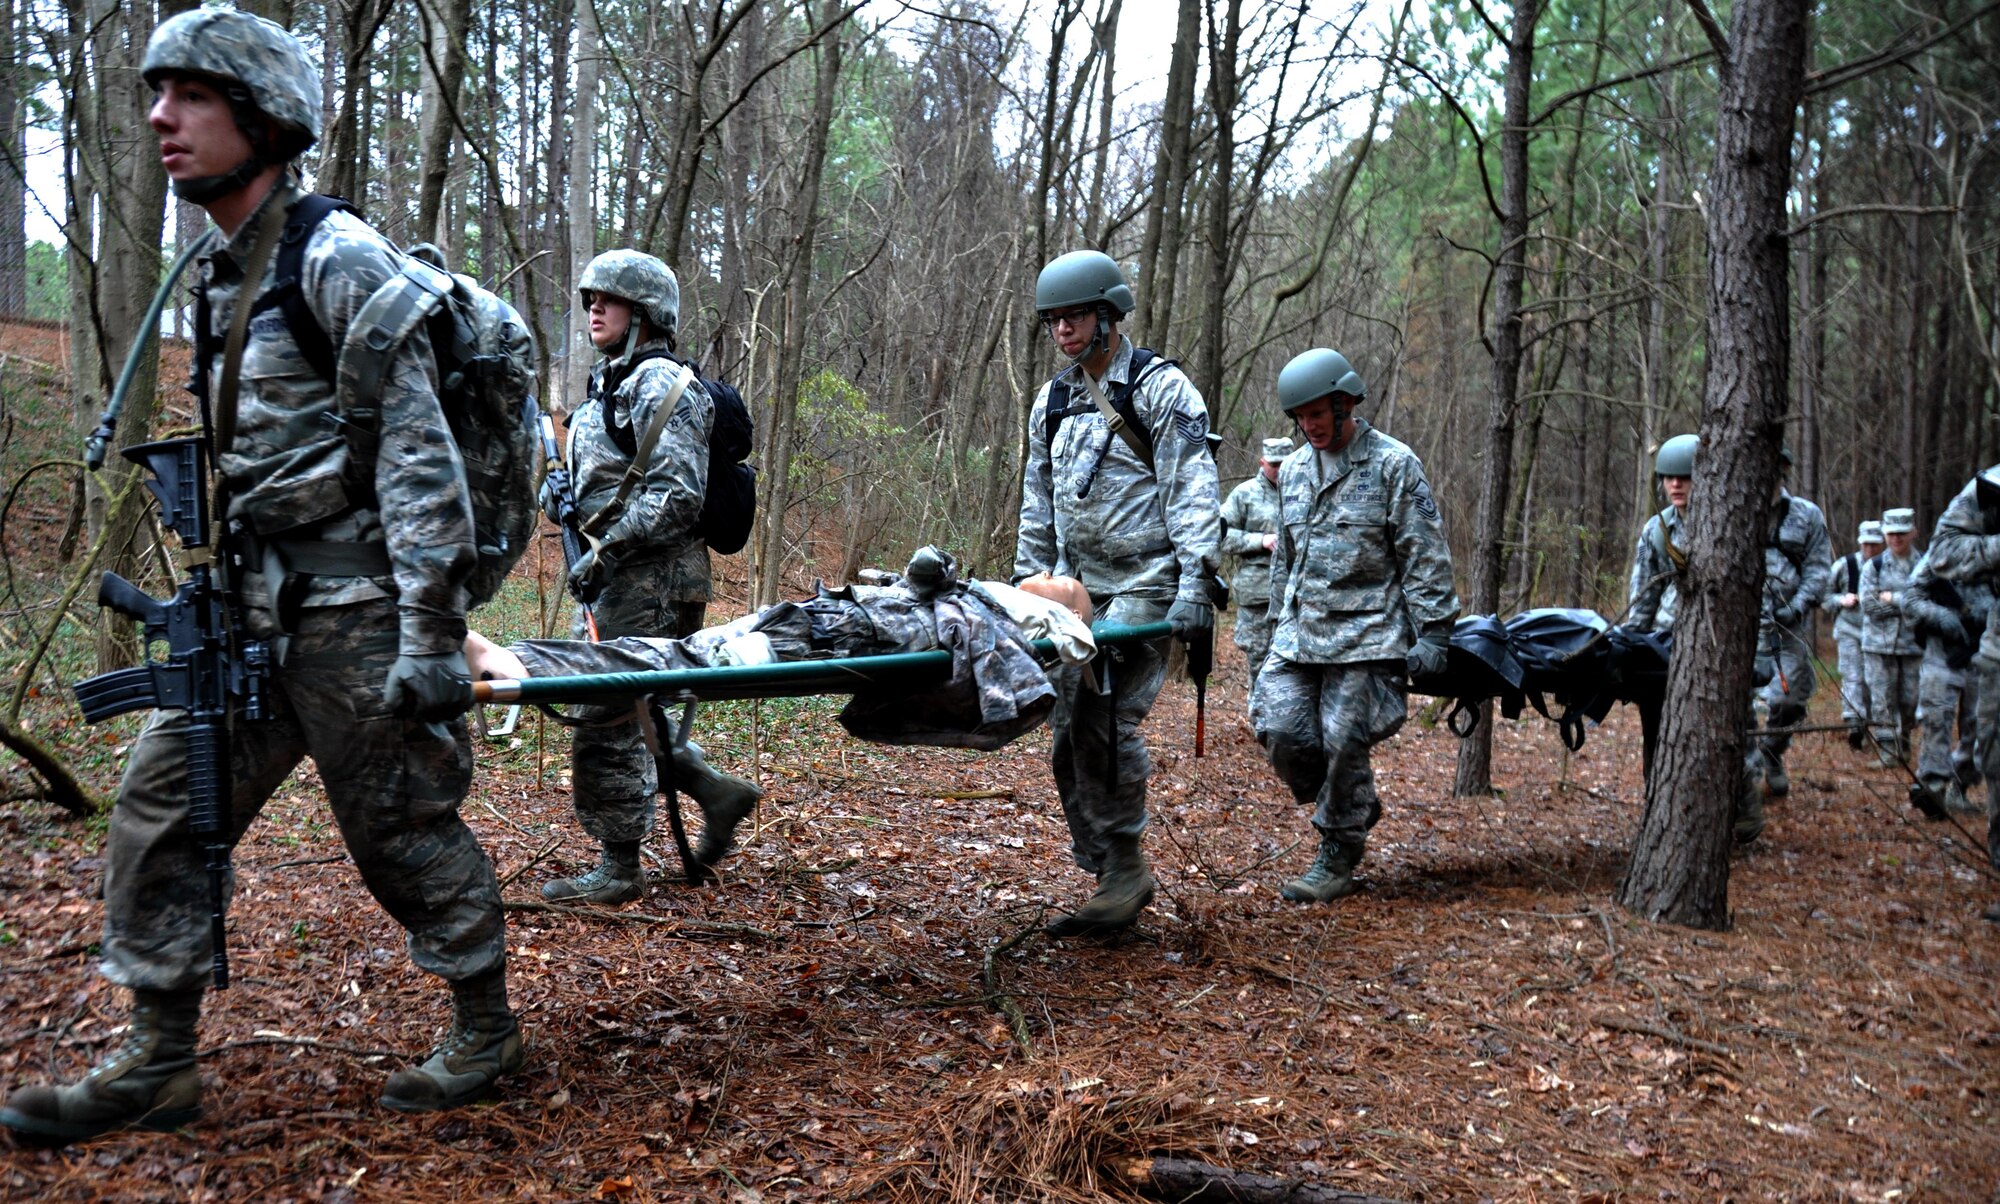 Airmen from the 911th Force Support Squadron, Pittsburgh, Pa., carry casualty dummies during OPERATION Everybody Panic as part of Force Support Silver Flag at Dobbins Air Reserve Base, Ga., March 10, 2015. The challenge consisted of teams competing against each other in nine different events ranging from following a convoy, building tents, fixing Babington burners, cooking meals, planning lodging, planning a base from scratch, driving a forklift and a scavenger hunt. (U.S. Air Force photo/Senior Airman Daniel Phelps)